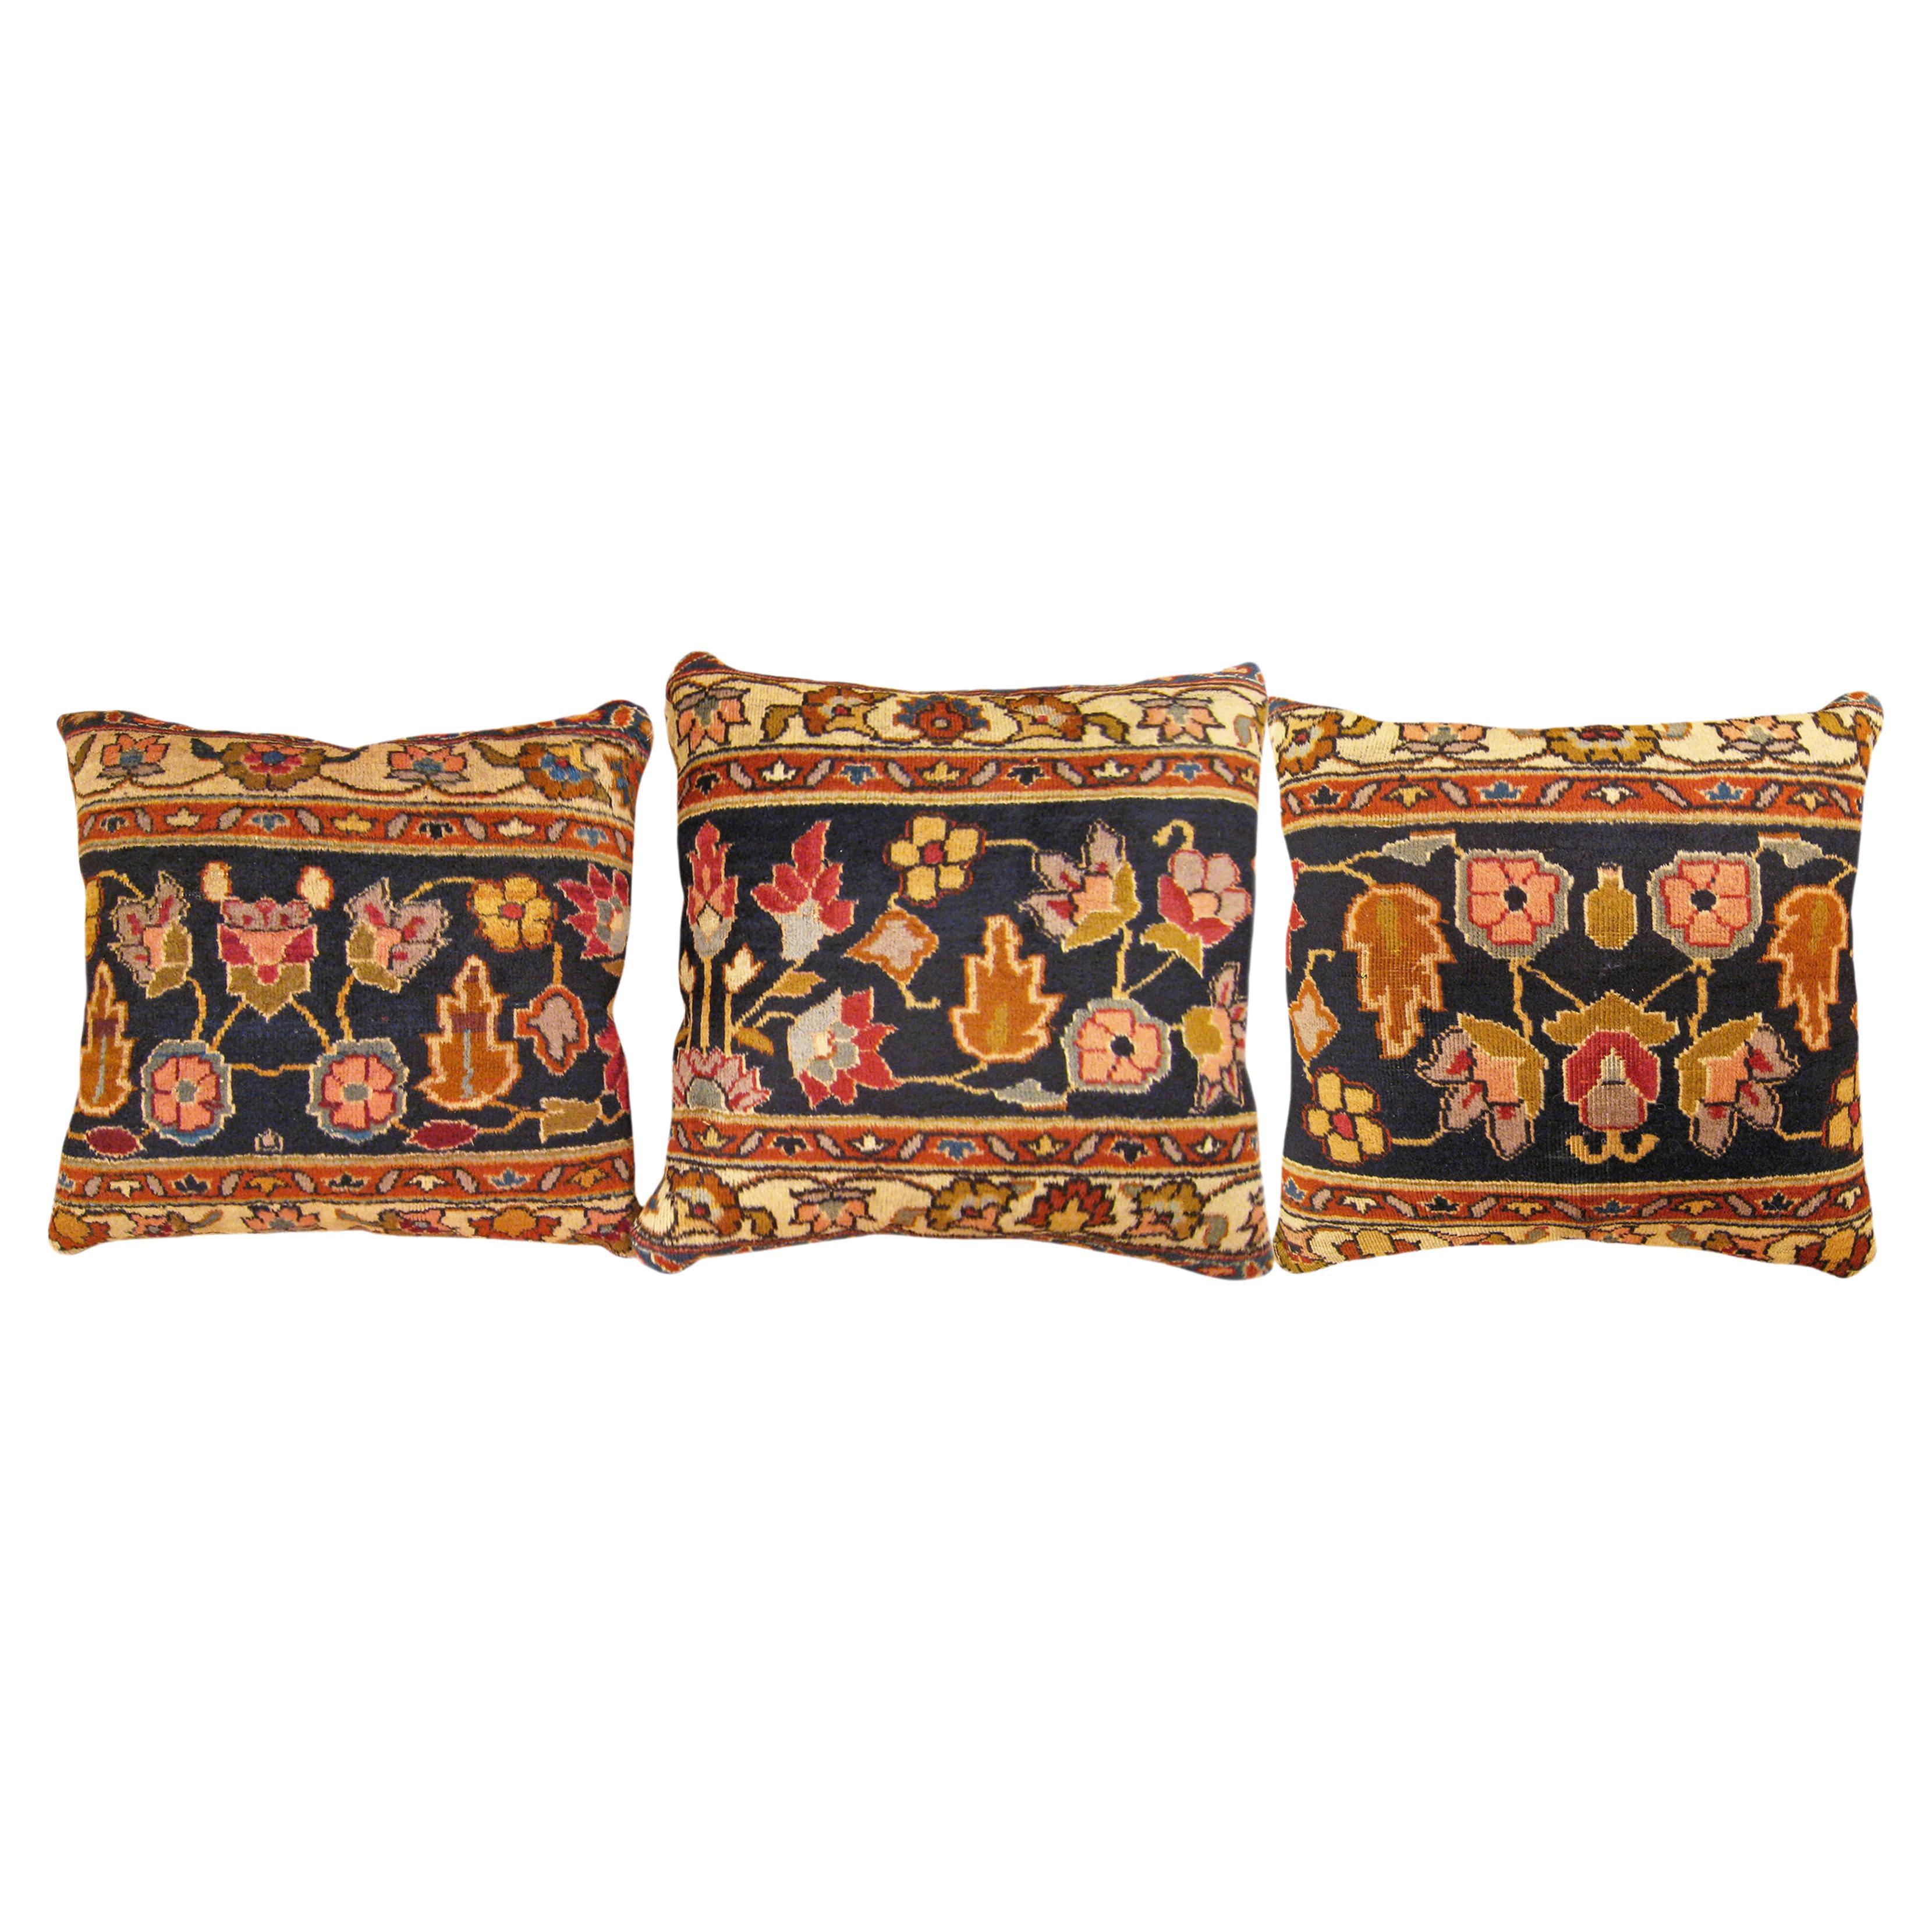 Set of Decorative Antique Indian Agra Rug Pillows with Floral Elements For Sale